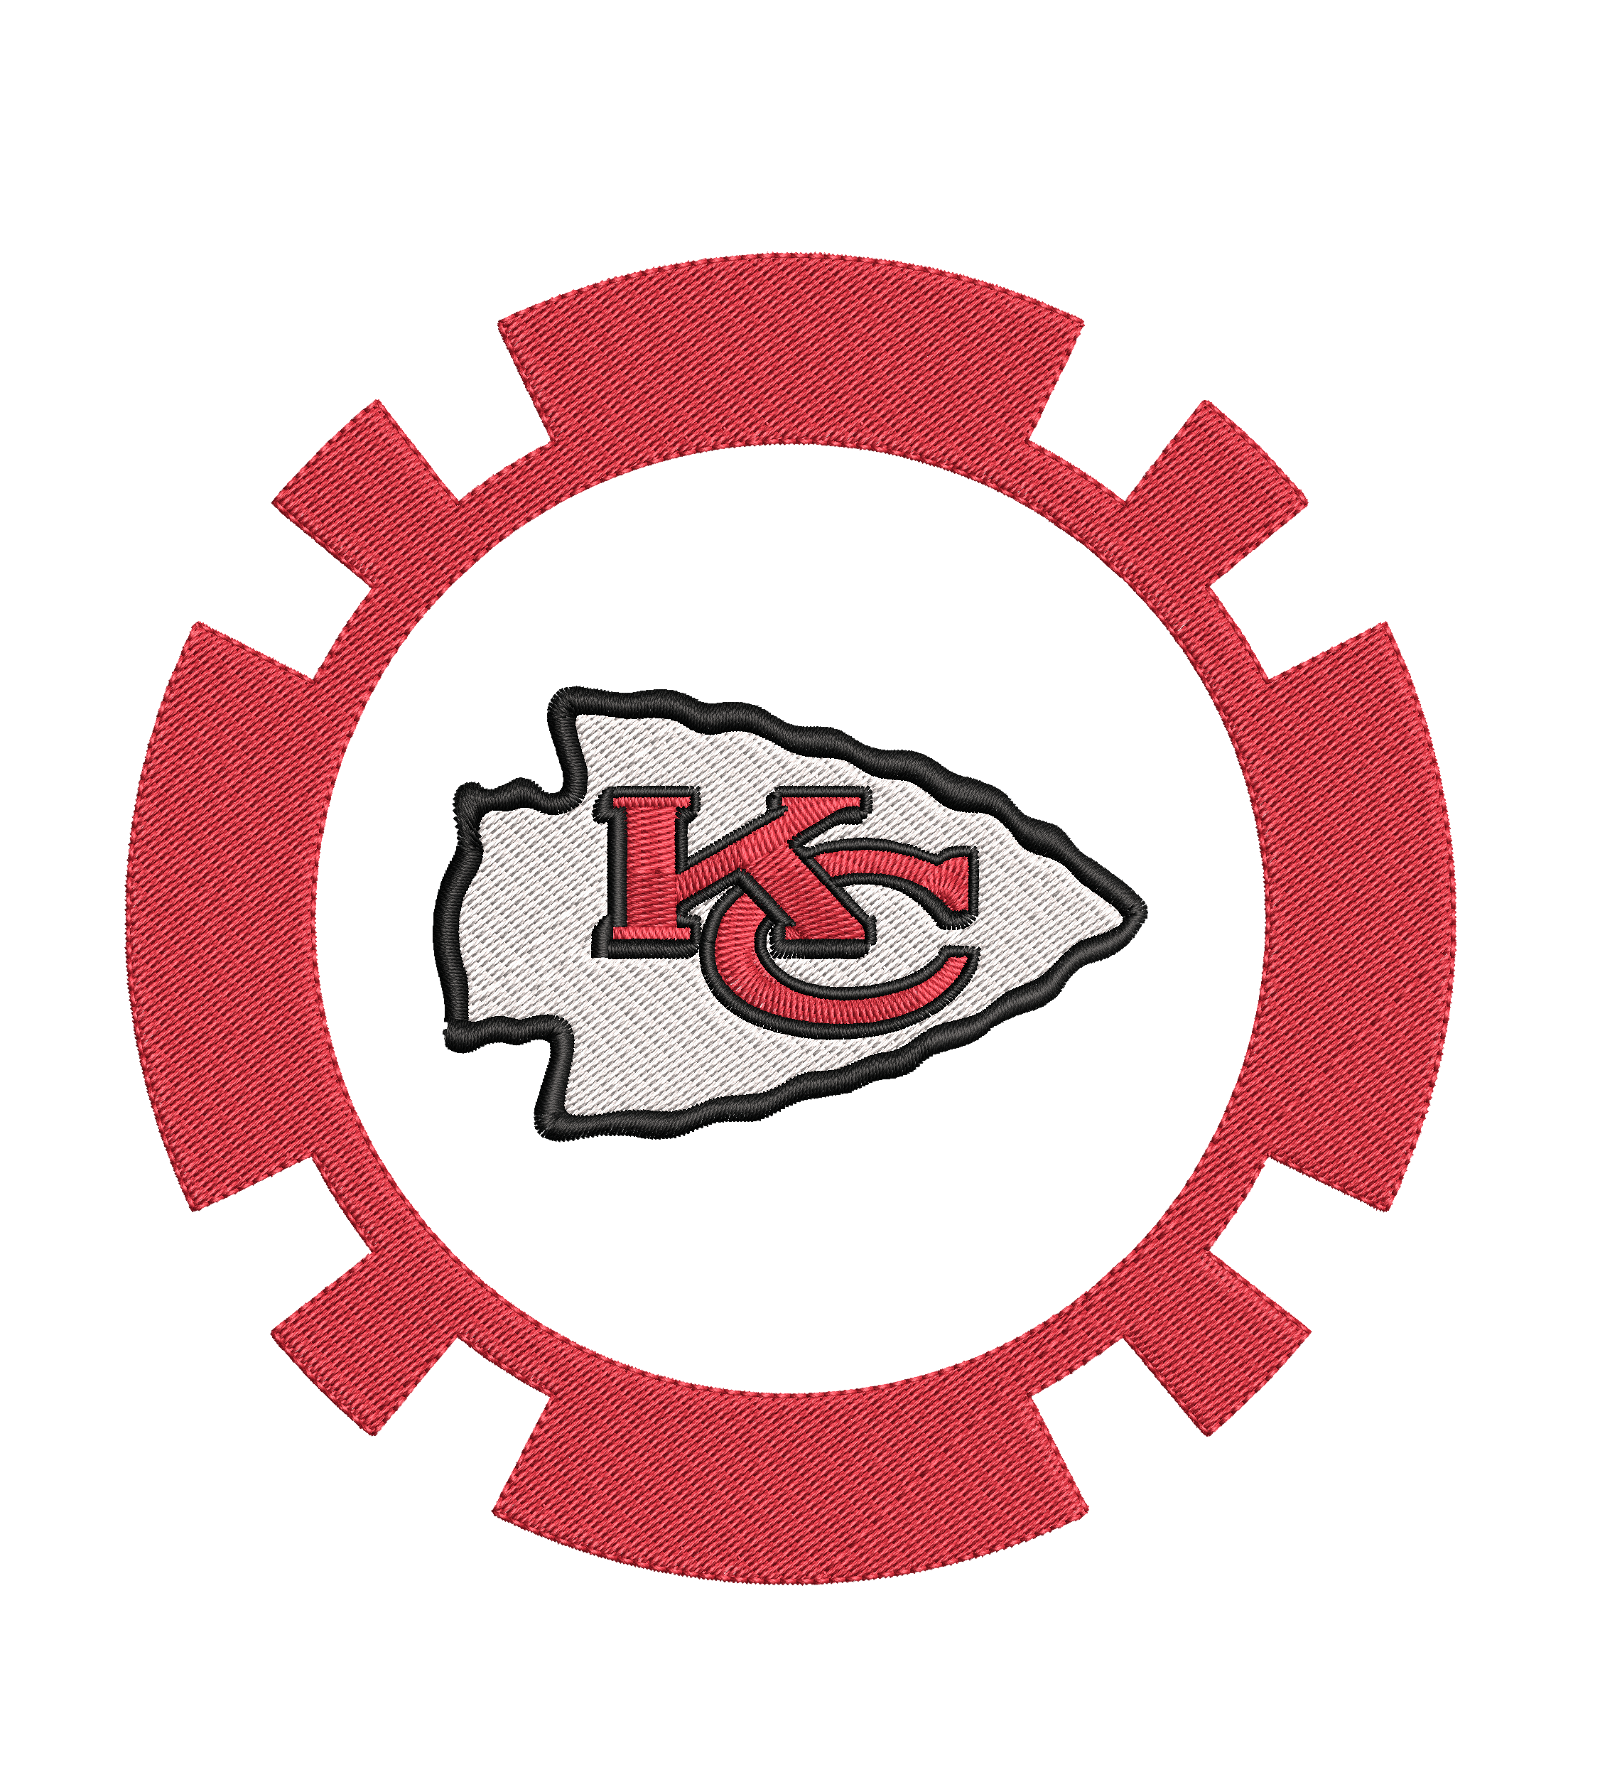 Kansas City Chiefs 5 : Embroidery Design - FineryEmbroidery